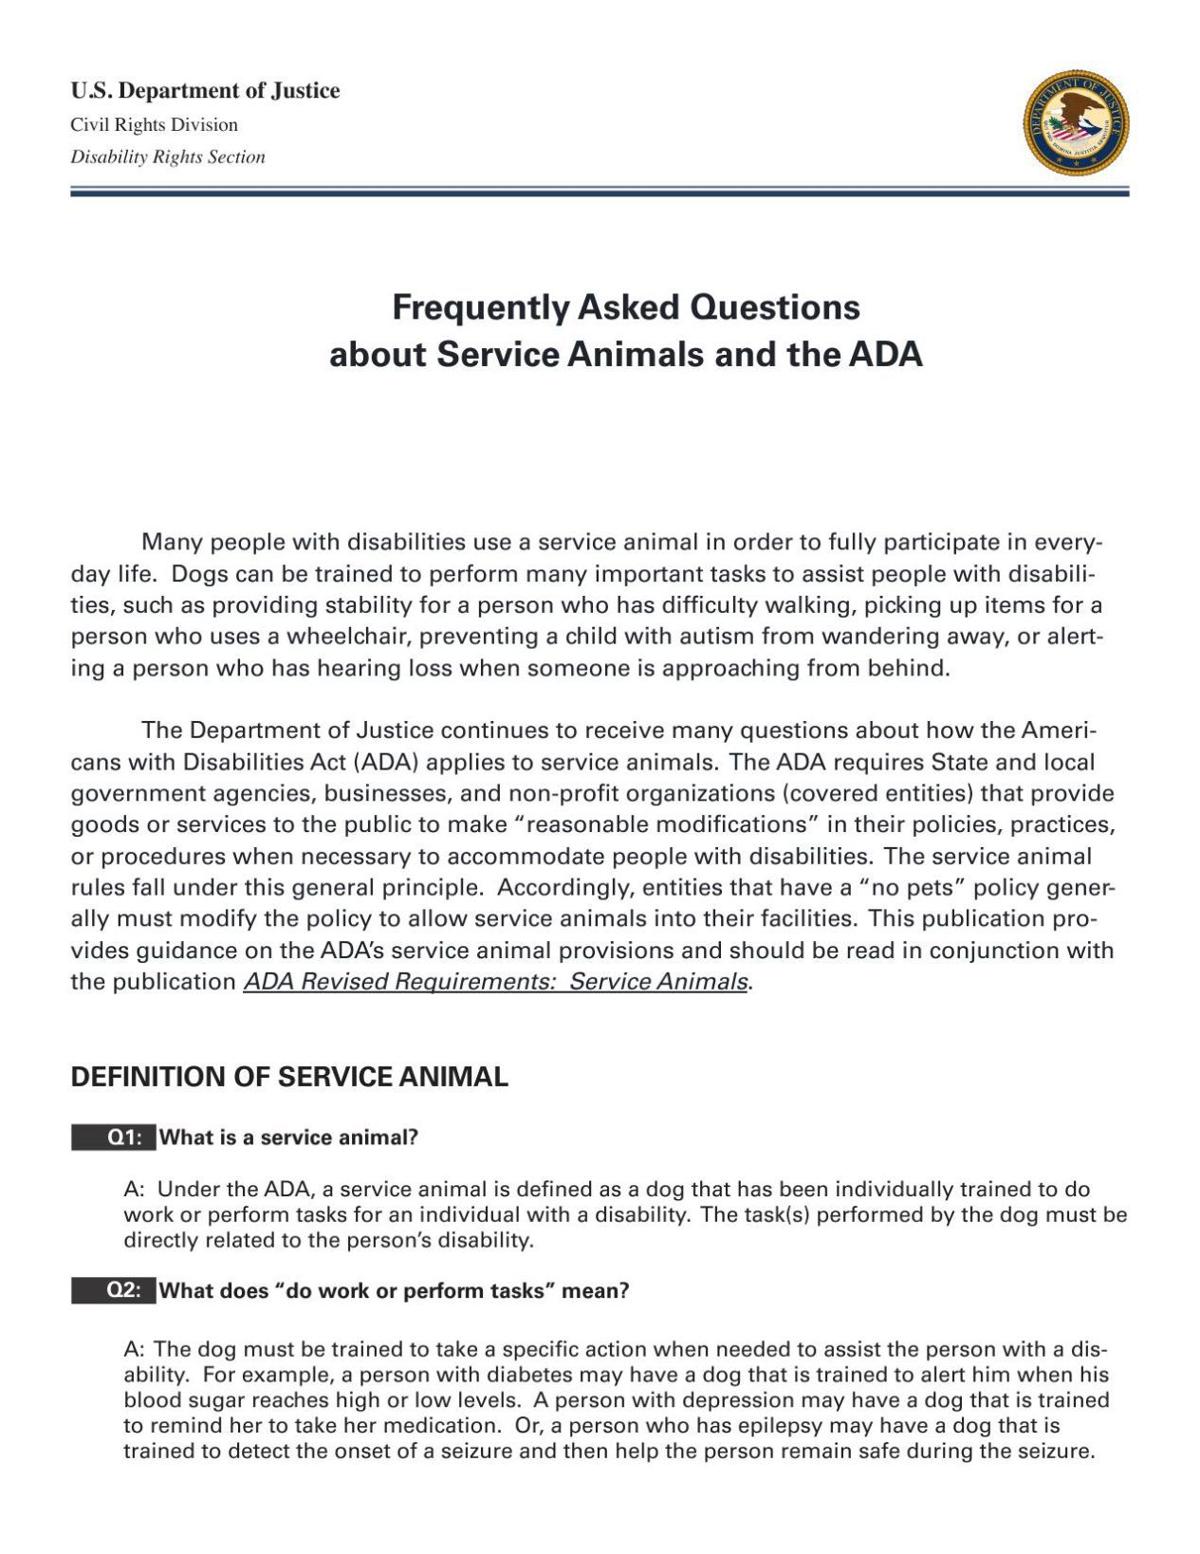 americans with disabilities act frequently asked questions